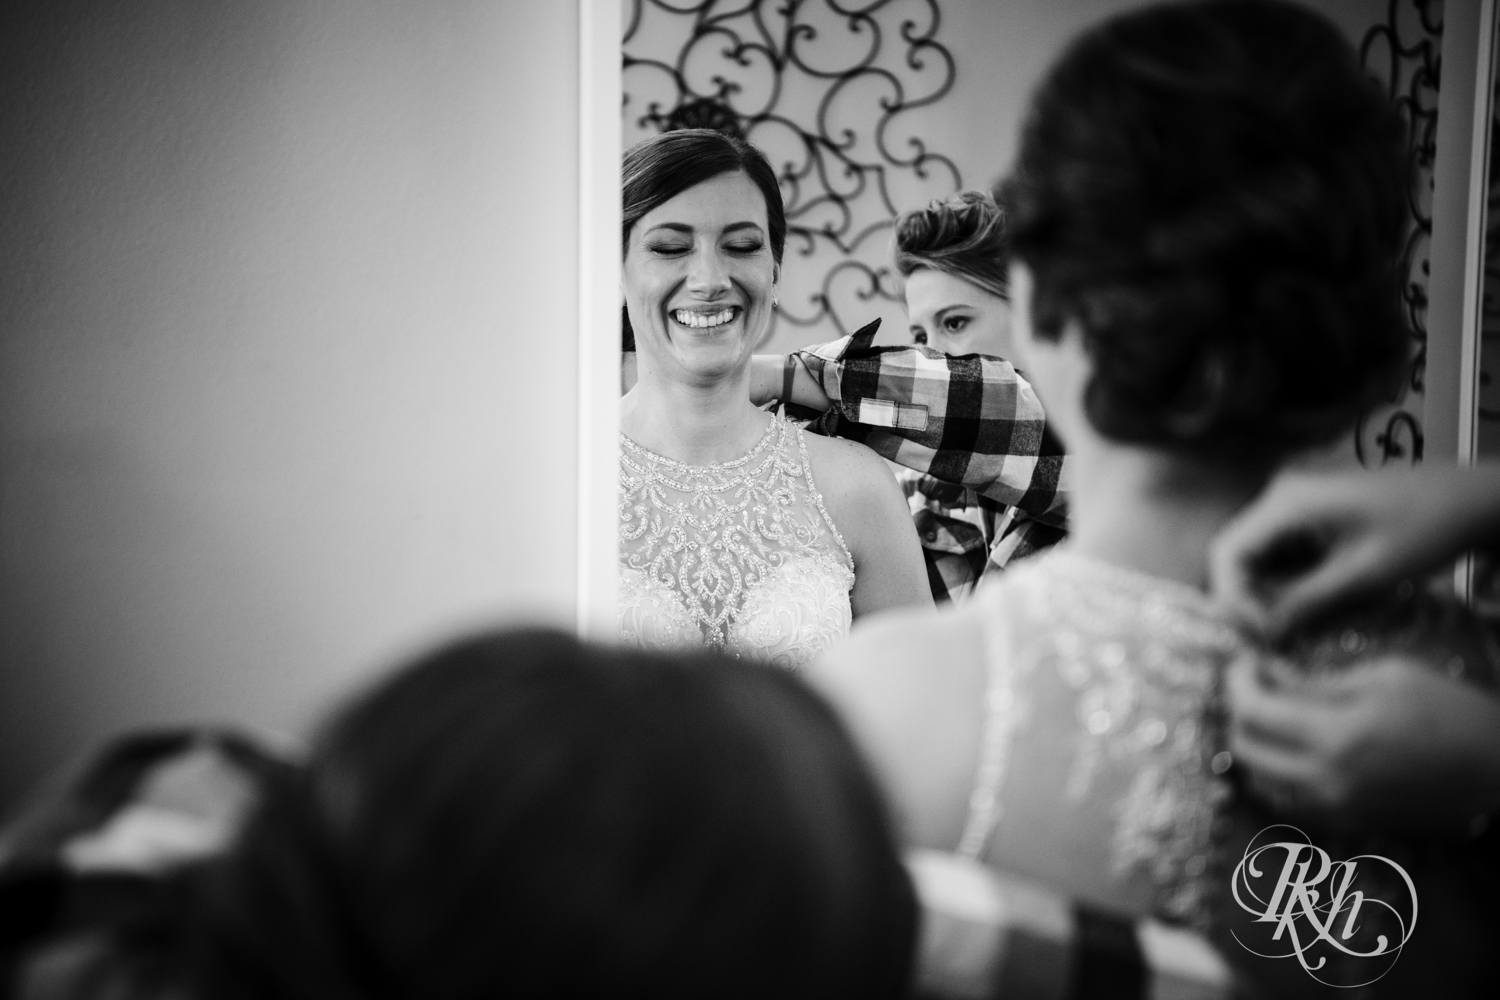 Bride laughs while getting buttoned into wedding dress in the Lumber Exchange Event Center in Minneapolis, Minnesota.